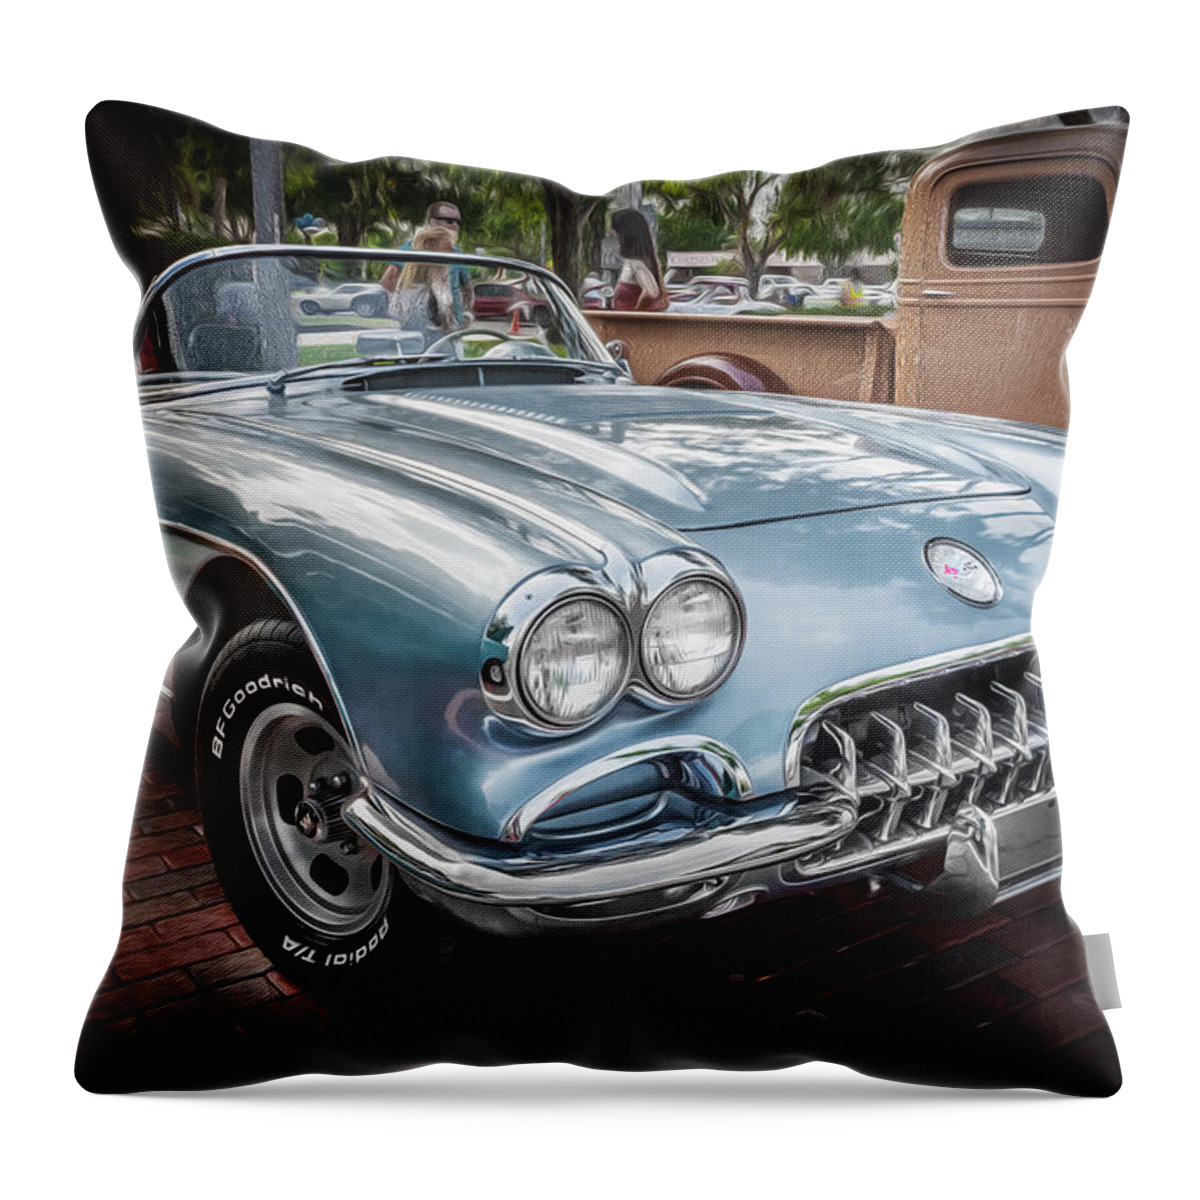 1958 Chevy Corvette Throw Pillow featuring the photograph 1958 Chevy Corvette Painted by Rich Franco